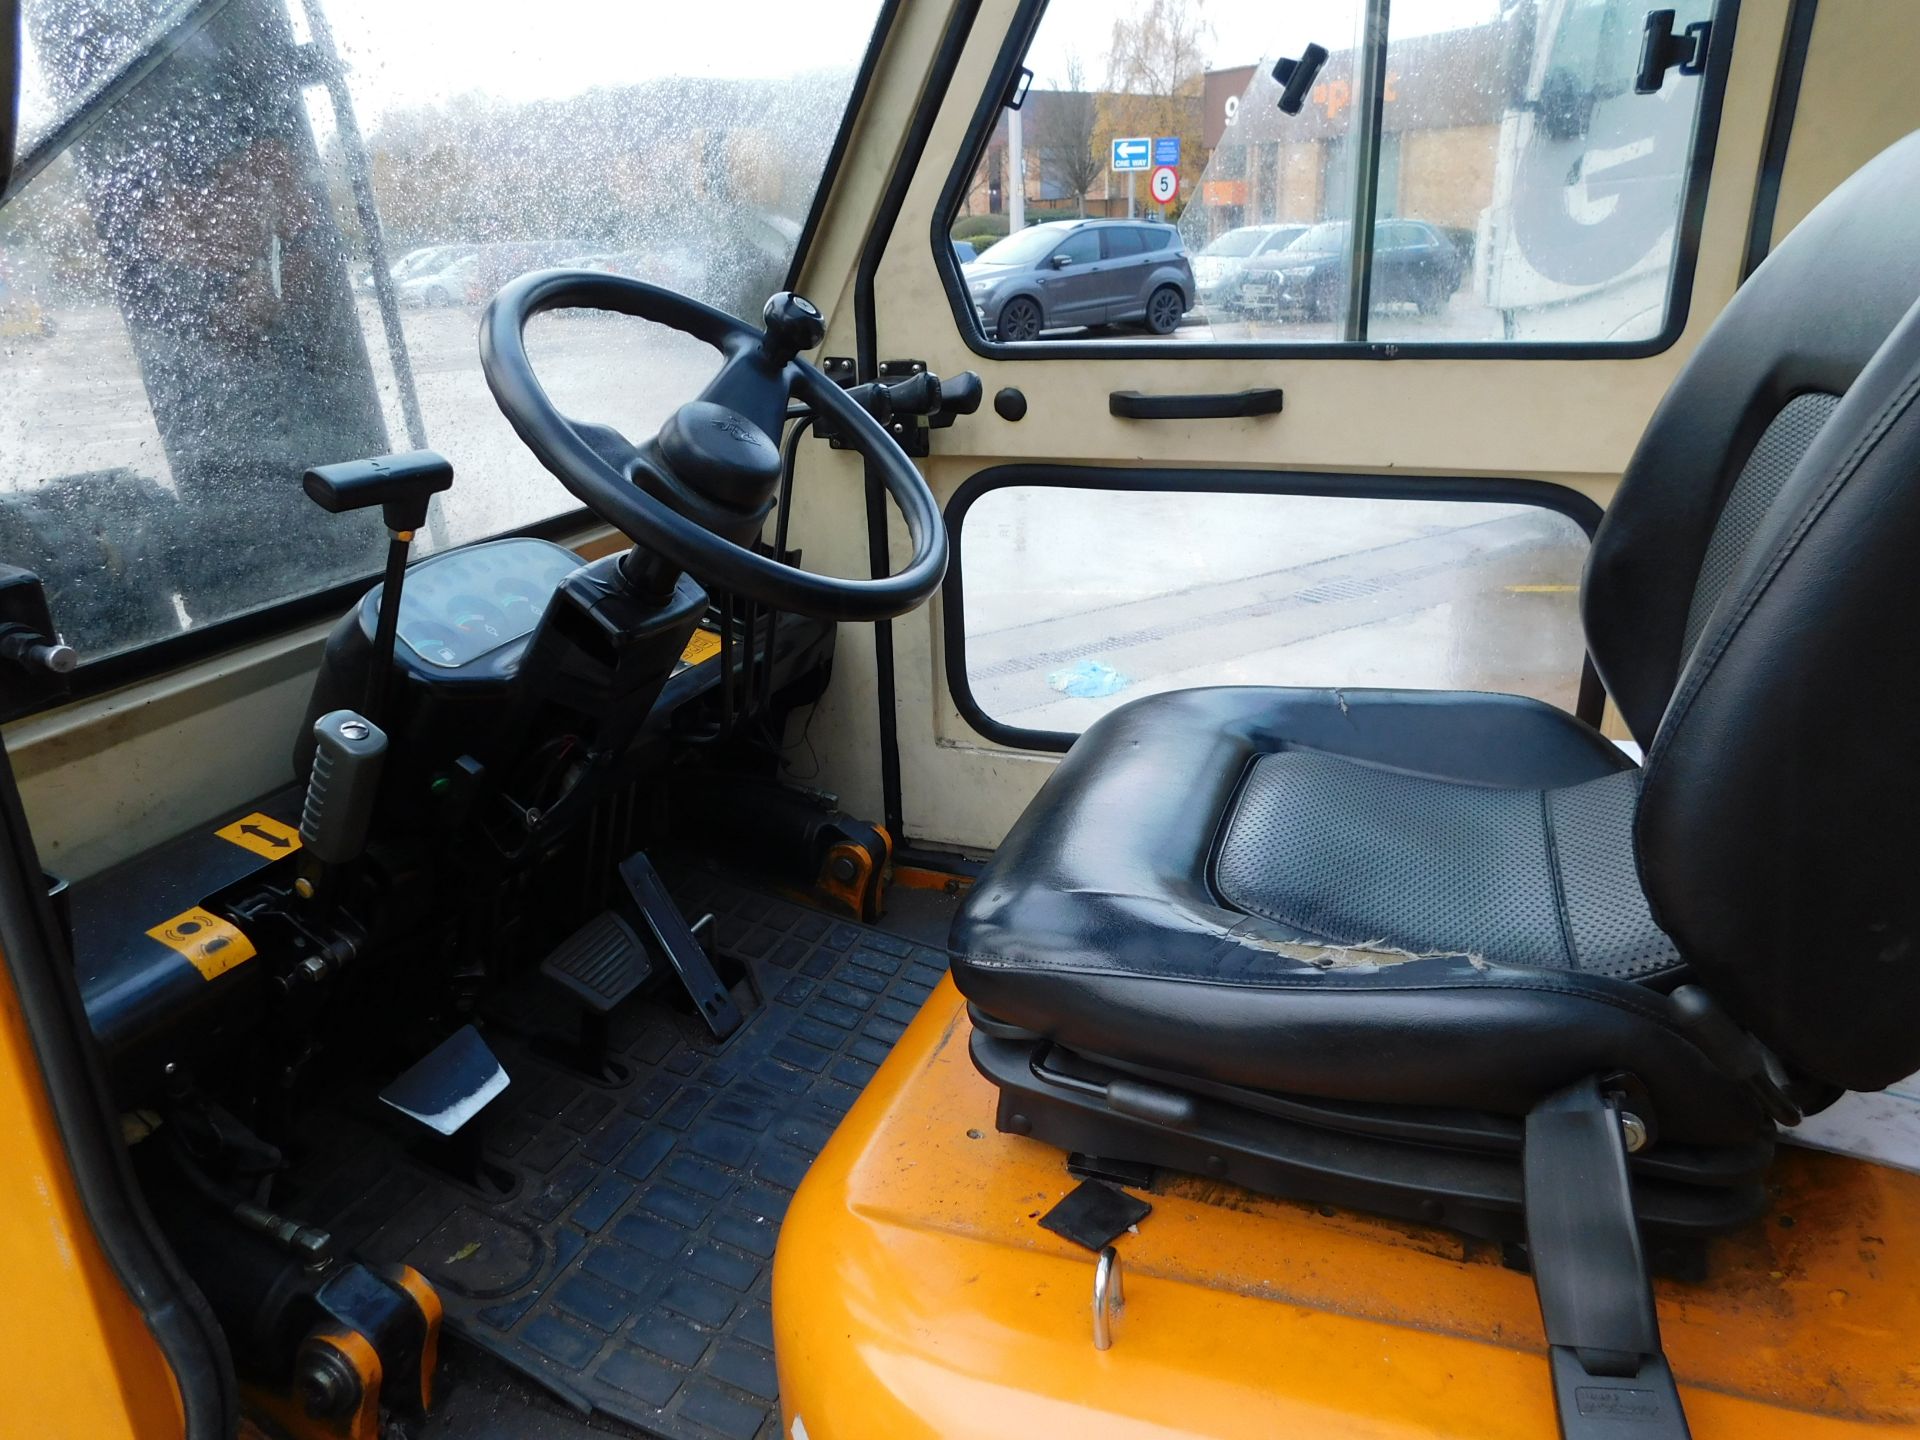 2007 Samuk H35L Gas Powered Forklift, Serial Number 070100559 (Located North Manchester. Please - Image 9 of 13